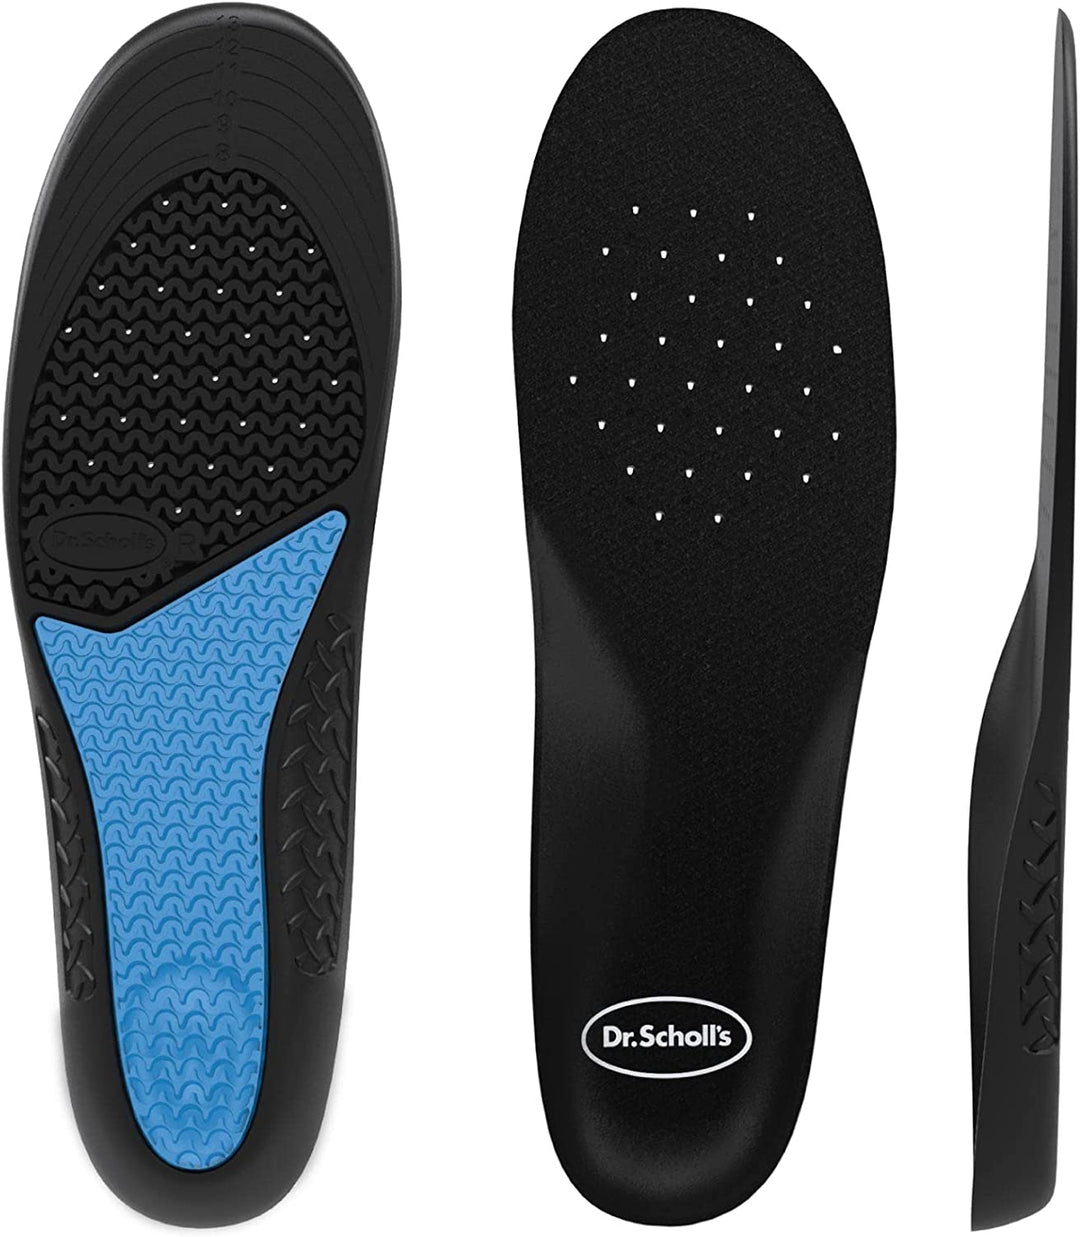 Work All-Day Superior Comfort Insoles (with) Massaging Gel®, Men, 1 Pair, Trim to Fit Men 8 - 14 - 3alababak